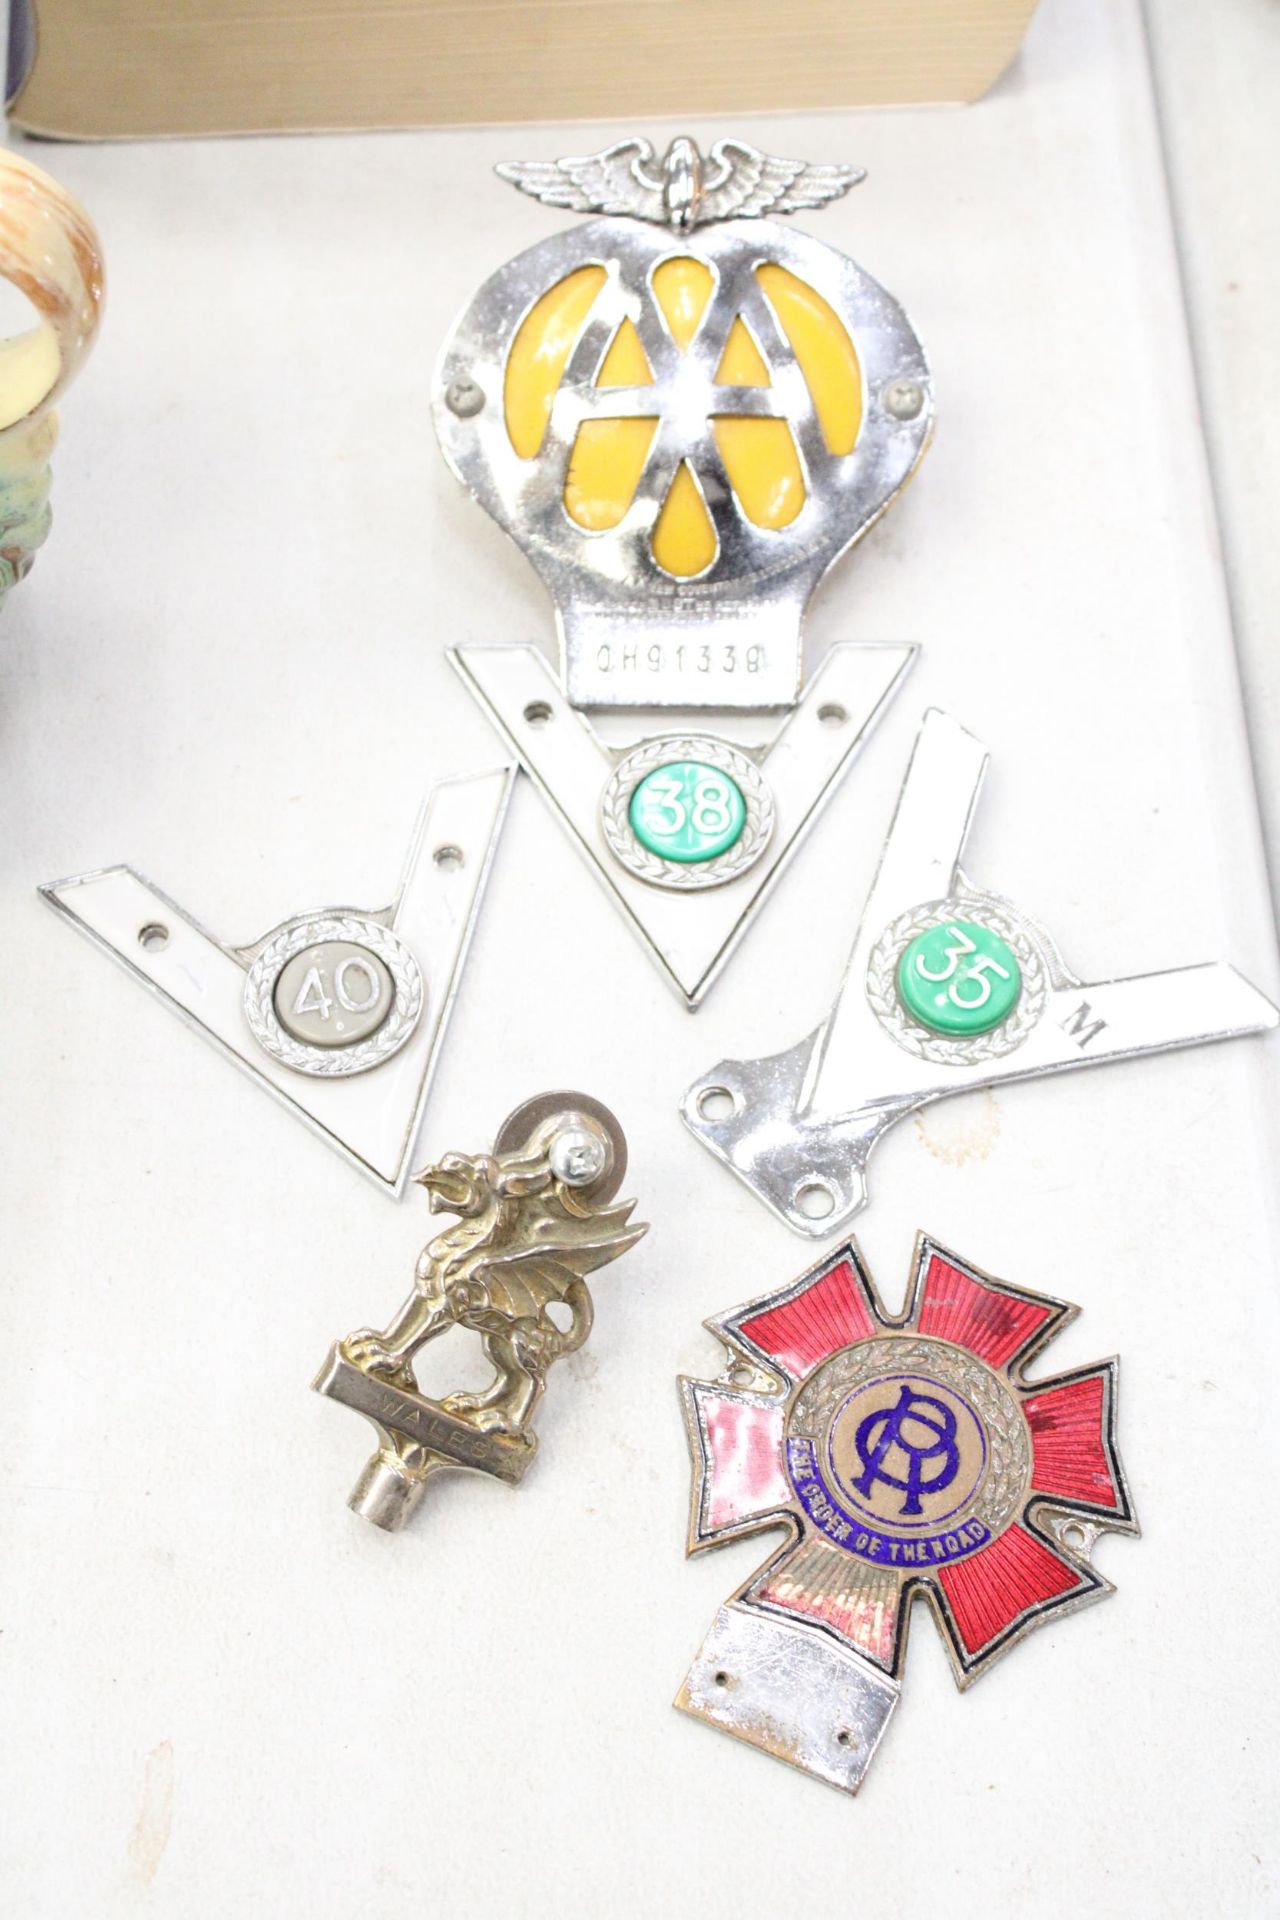 A QUANTITY OF VINTAGE CAR BADGES TO INCLUDE THE AA, VETERAN MOTORISTS ASSOCIATION CAR CLUB BADGES